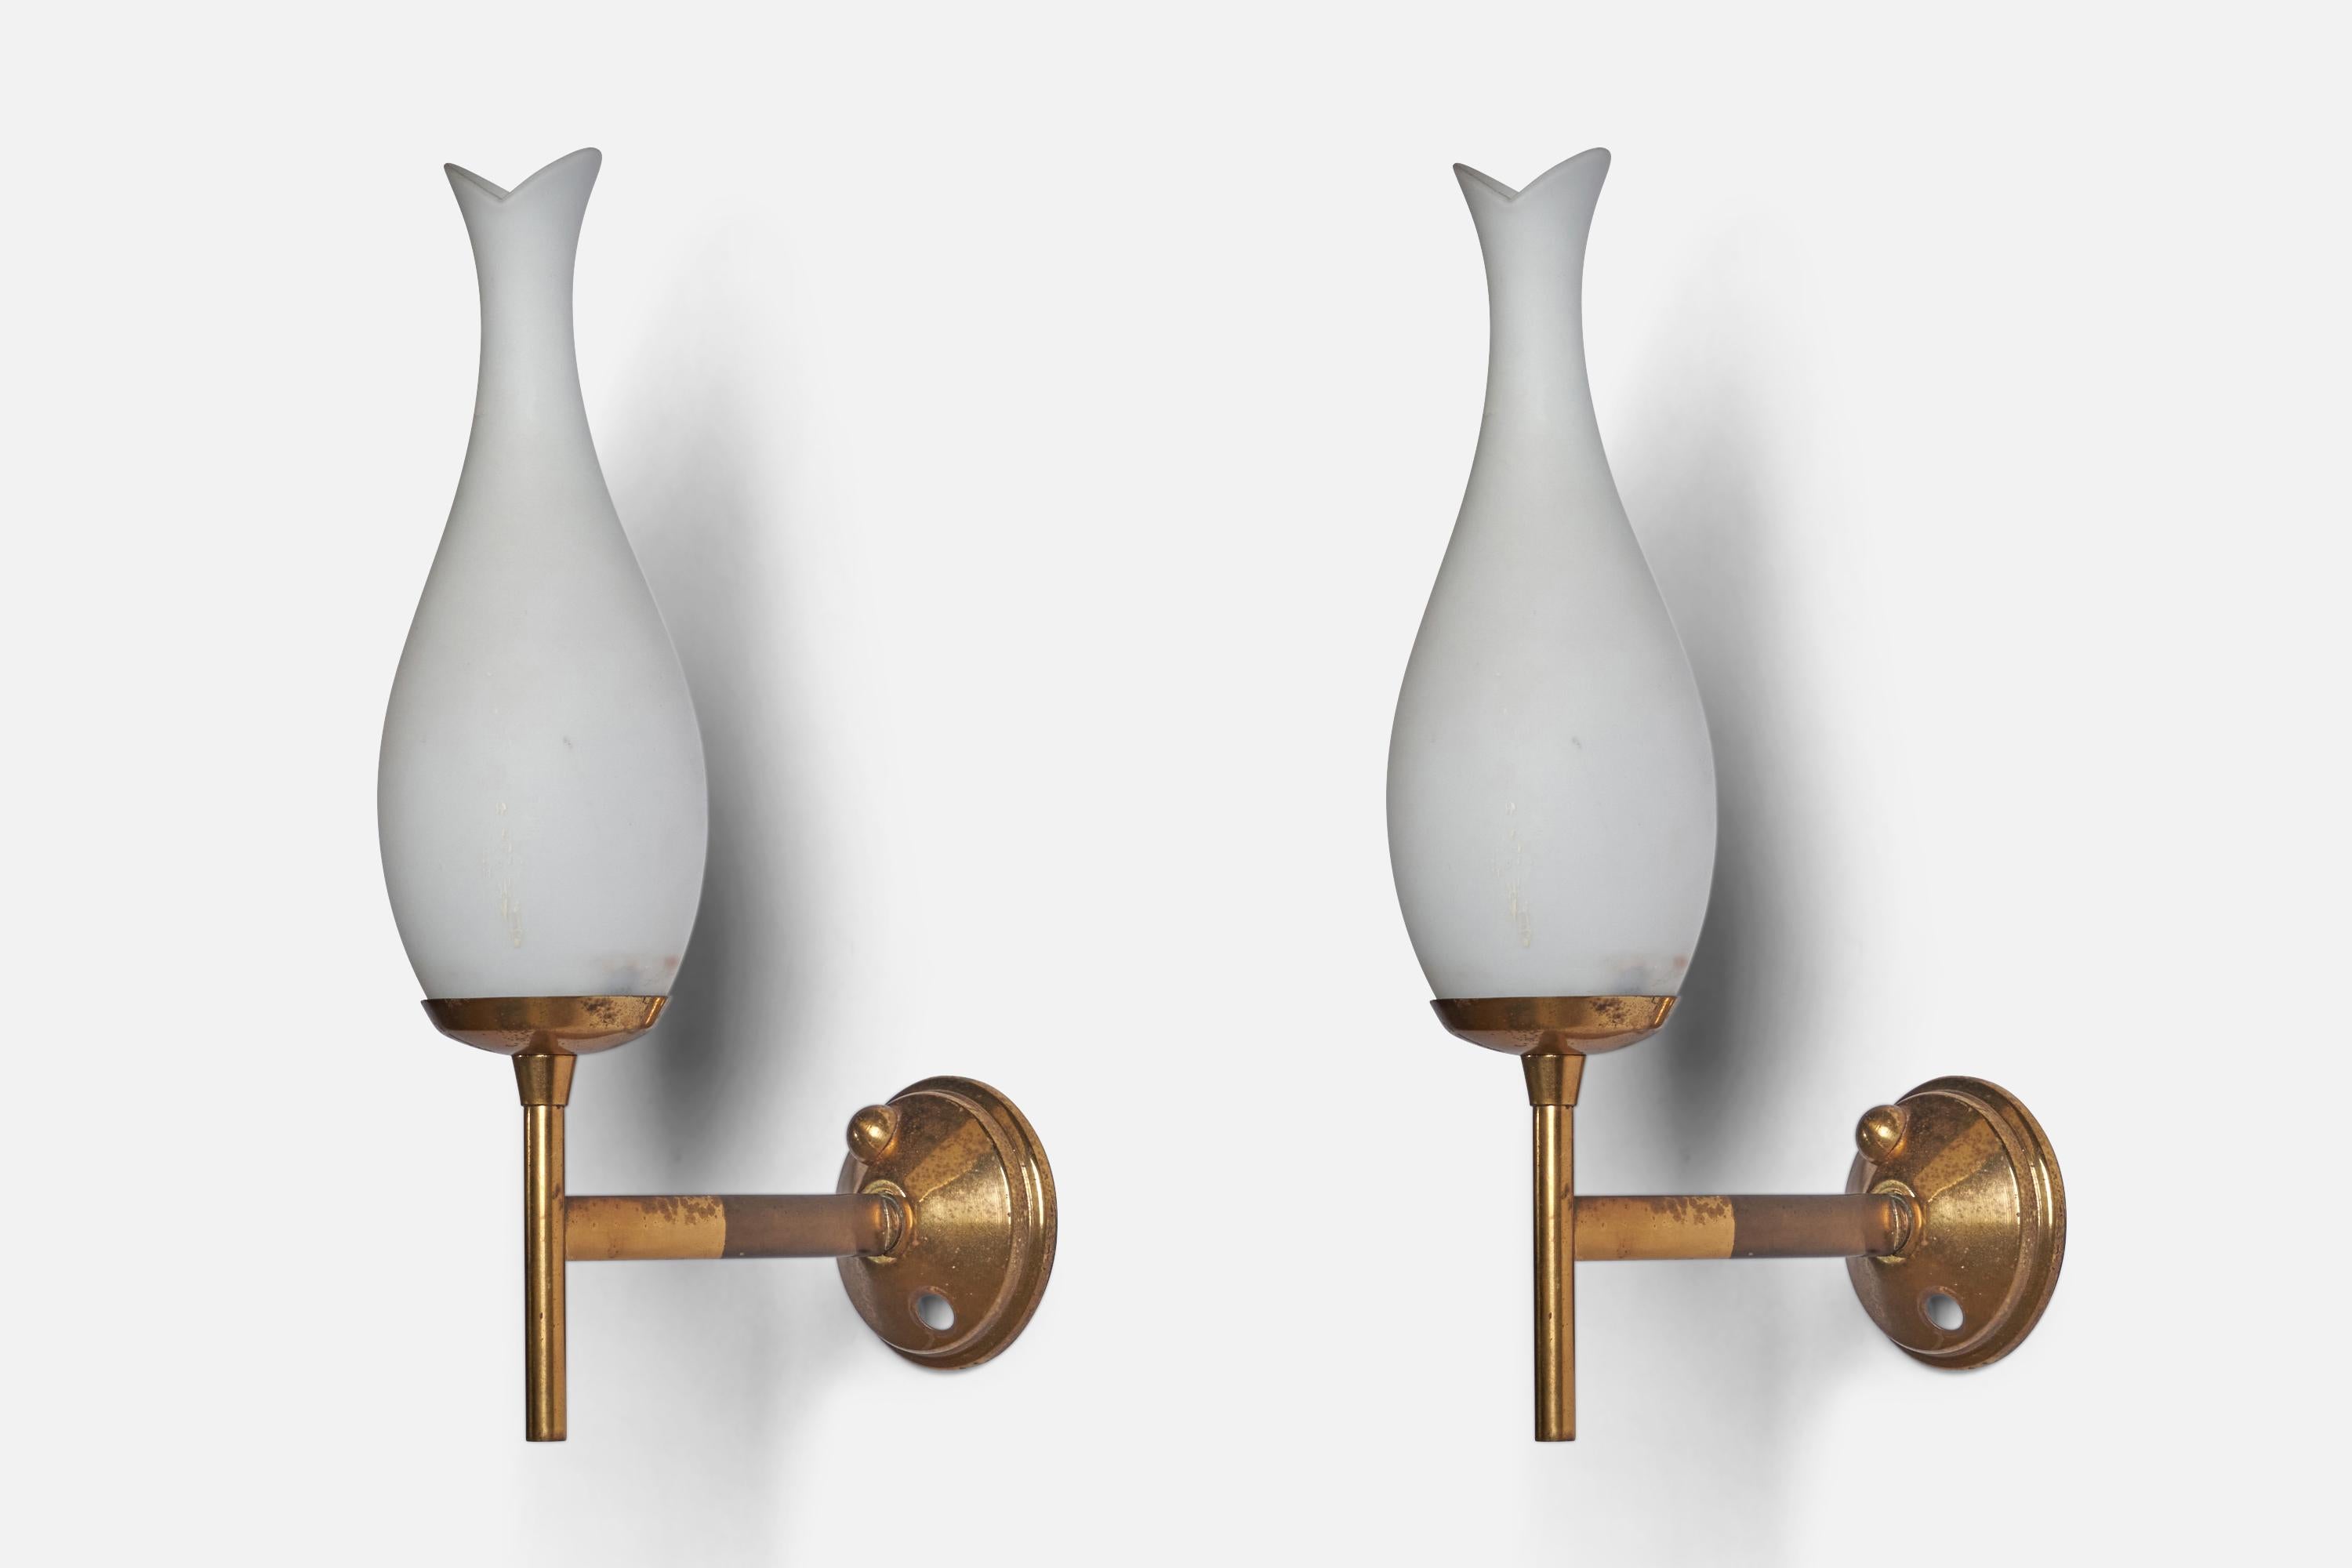 A pair of brass and glass wall lights designed and produced in Italy, c. 1940s.

Overall Dimensions: 12